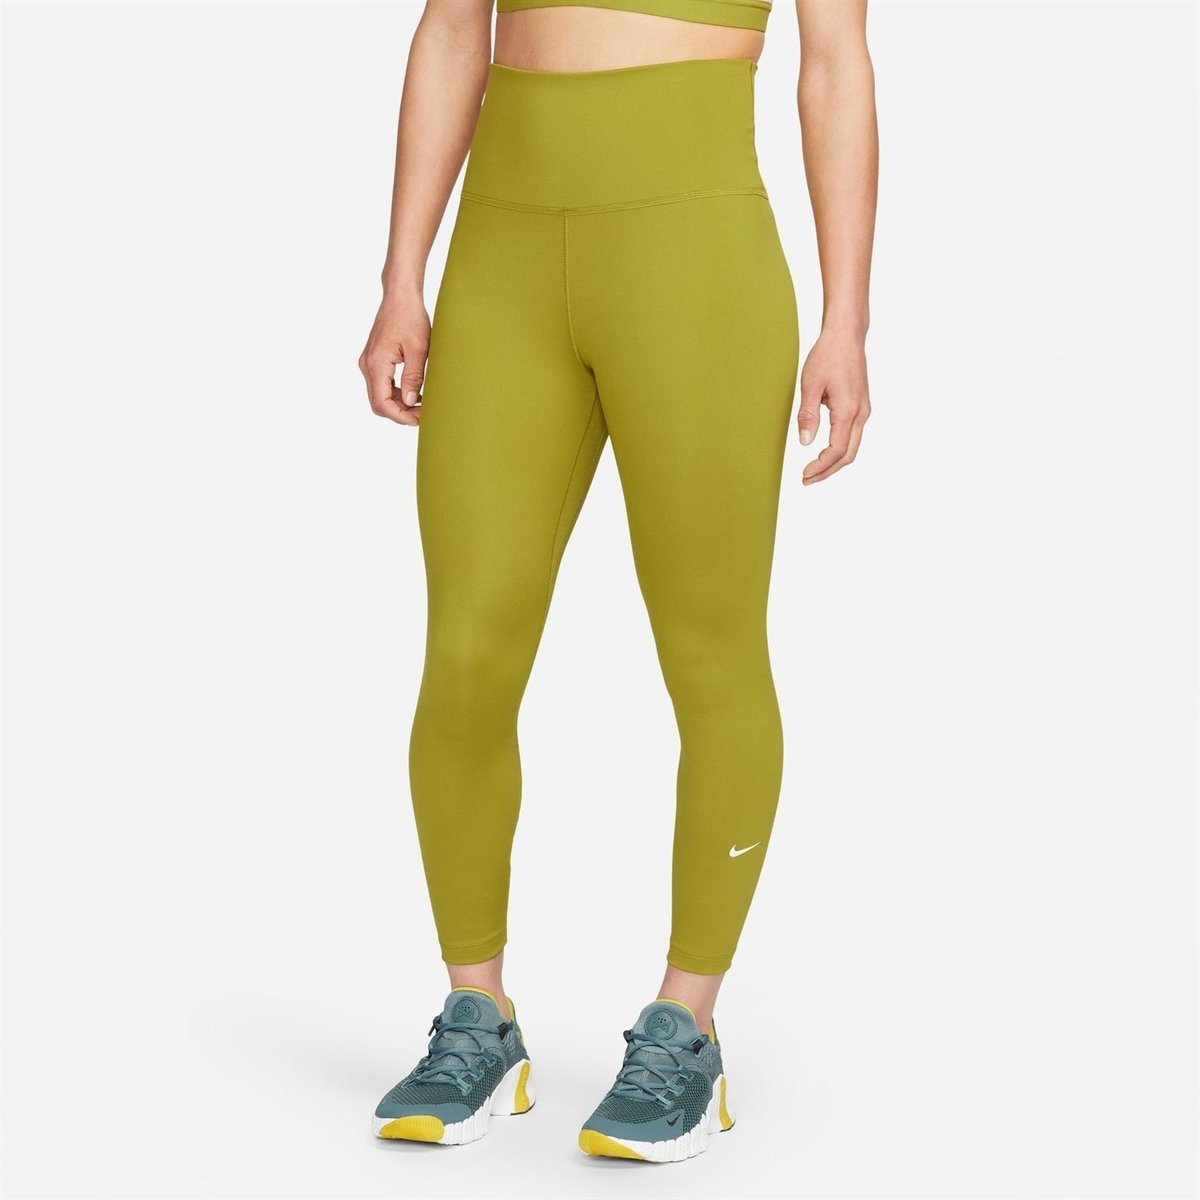 Fashion Look Featuring Nike Activewear Tops and Tek Gear Leggings by  Livinginyellow - ShopStyle